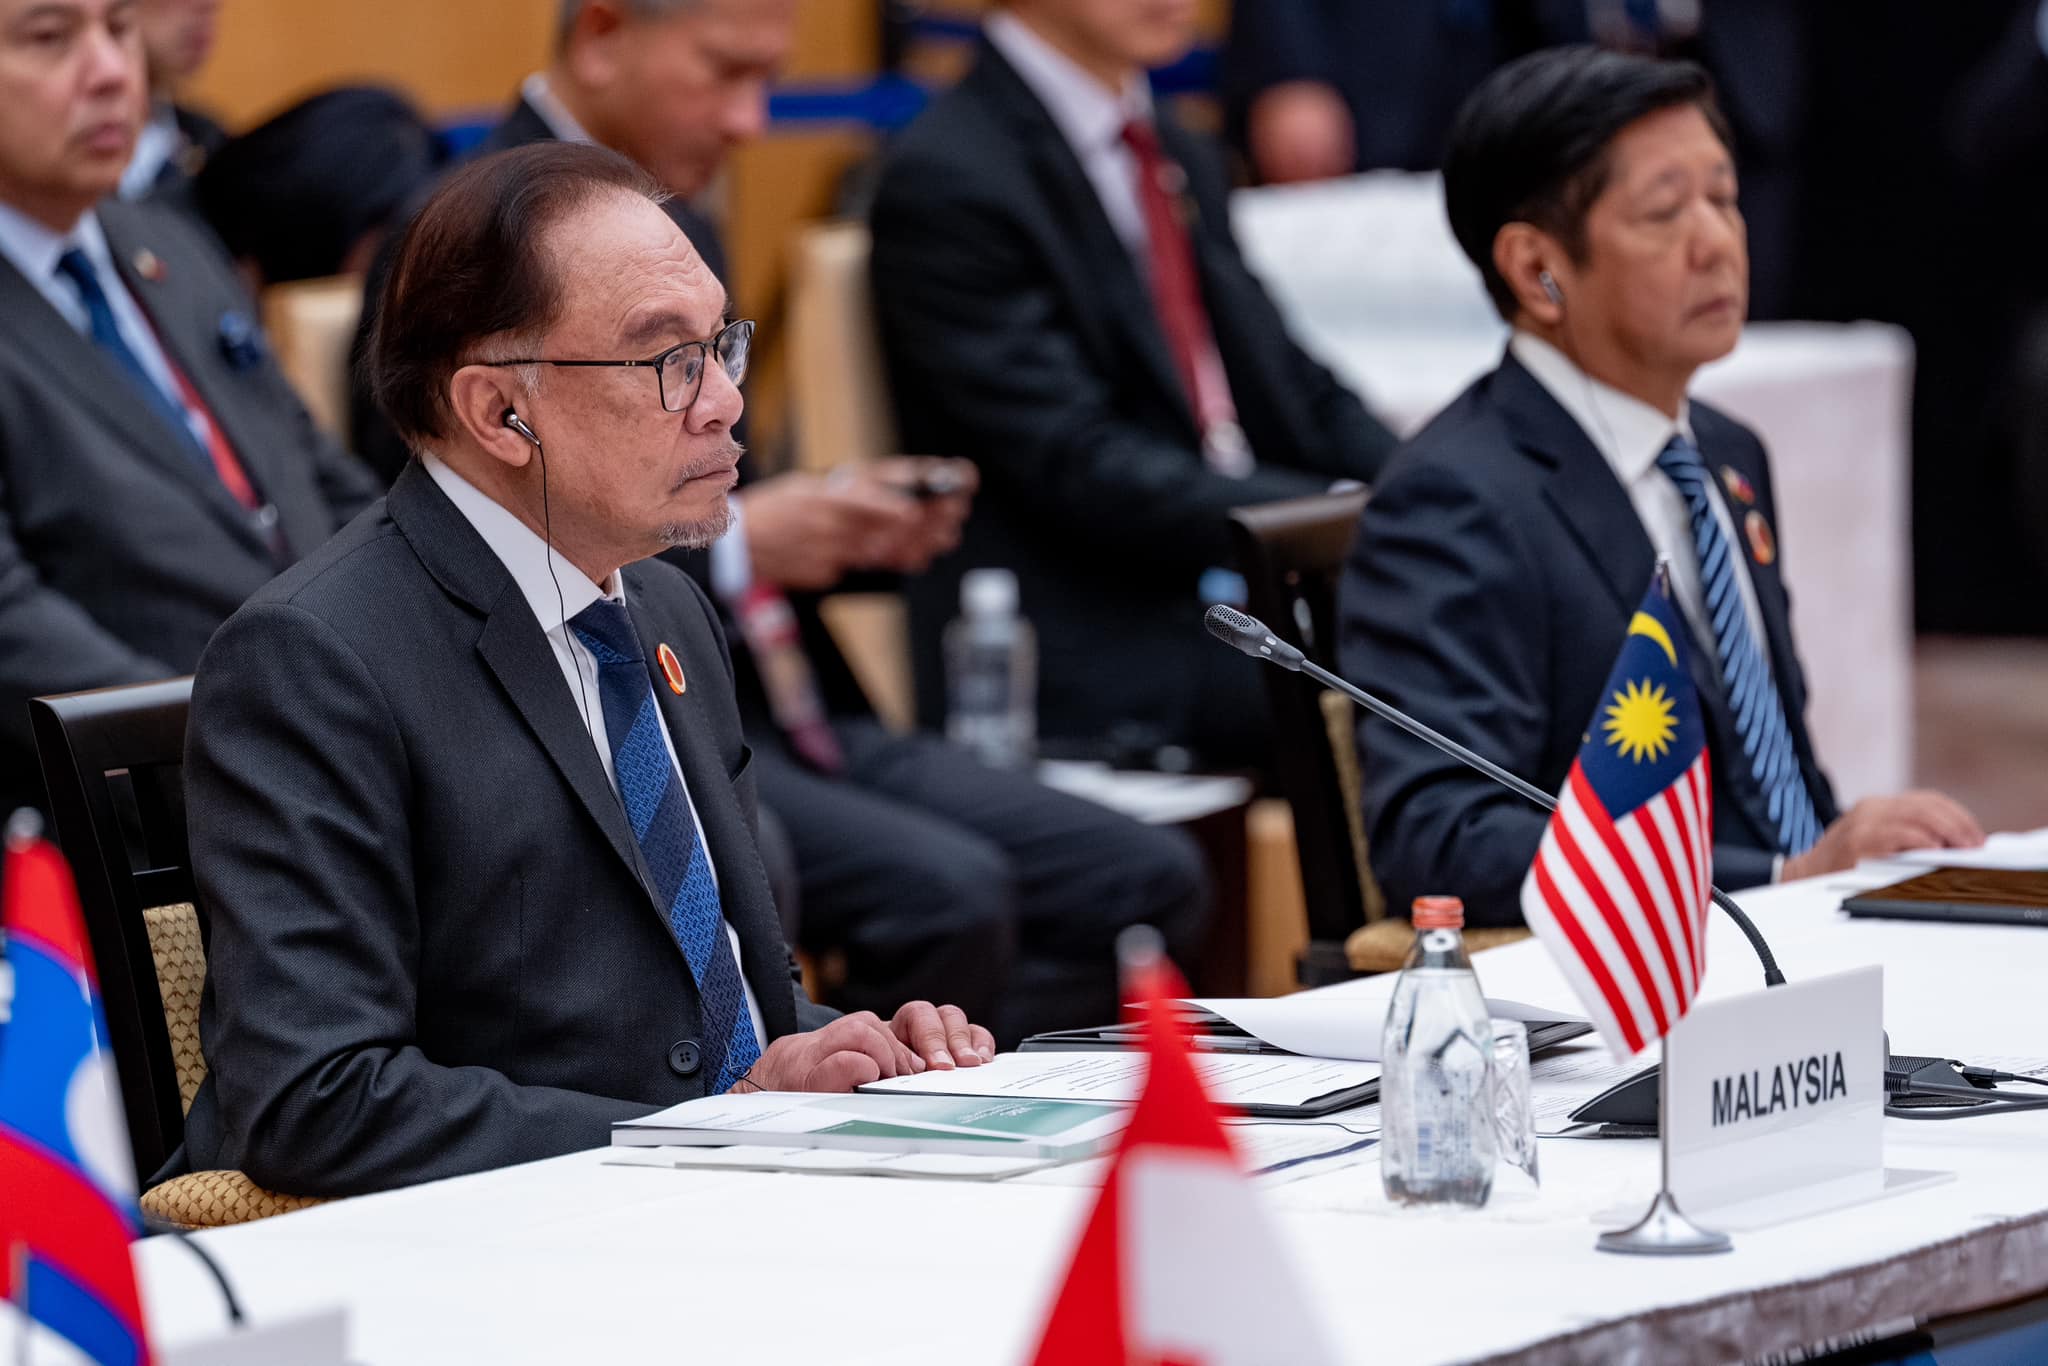 Japan firms’ RM30-bil investment a ‘vote of confidence’ in Malaysia’s future, says Anwar